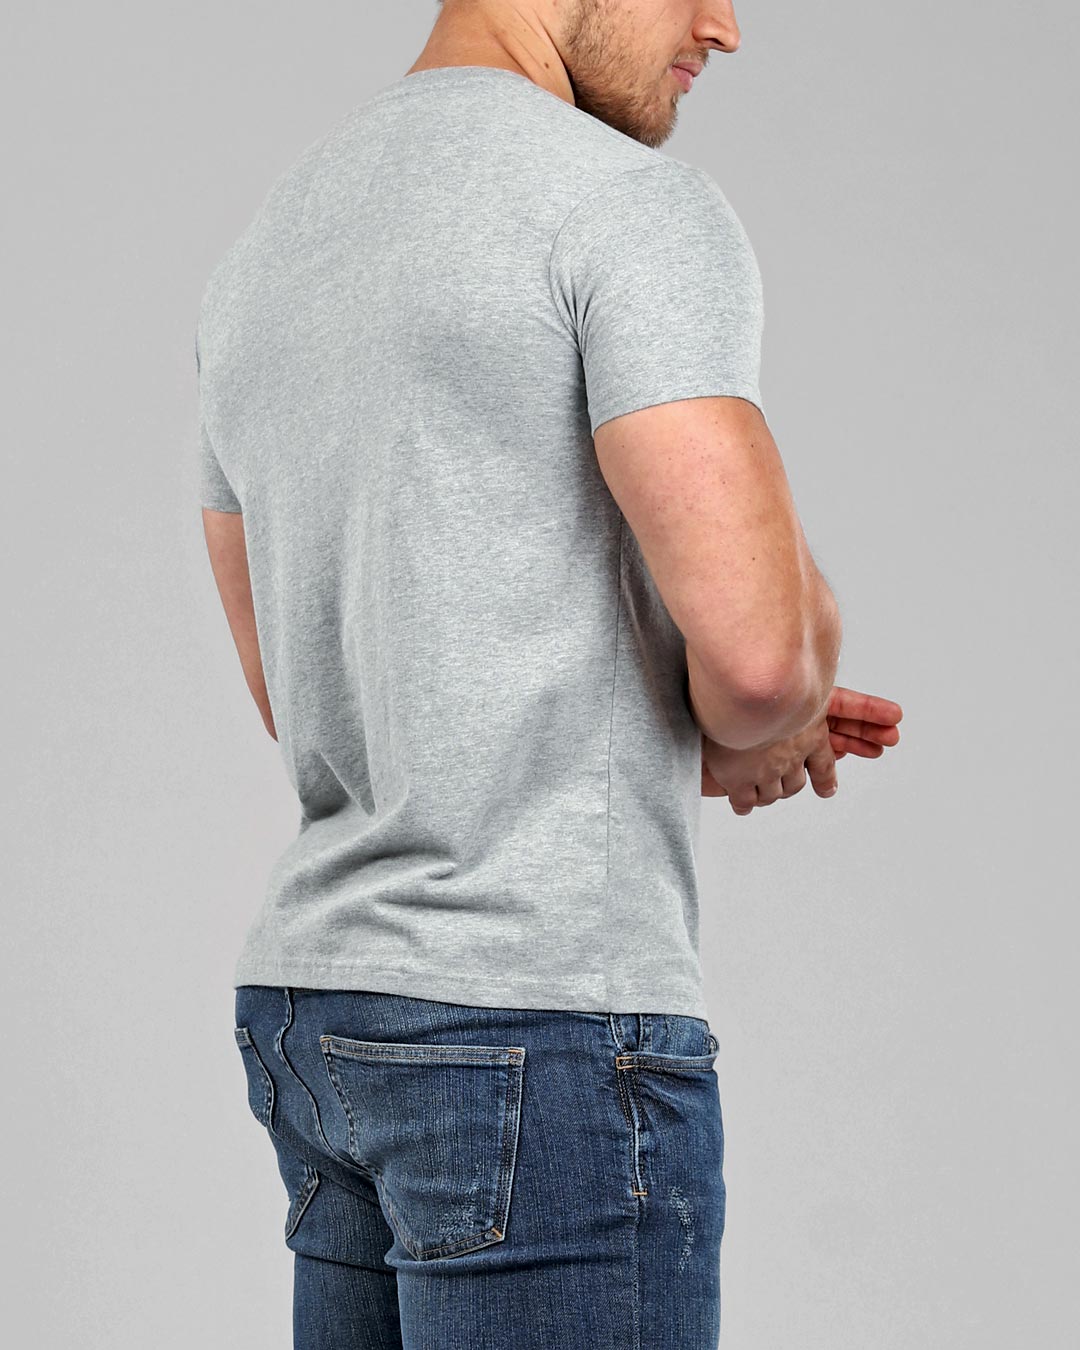 Crew Basic Muscle Fitted Plain T-Shirt - Light Grey